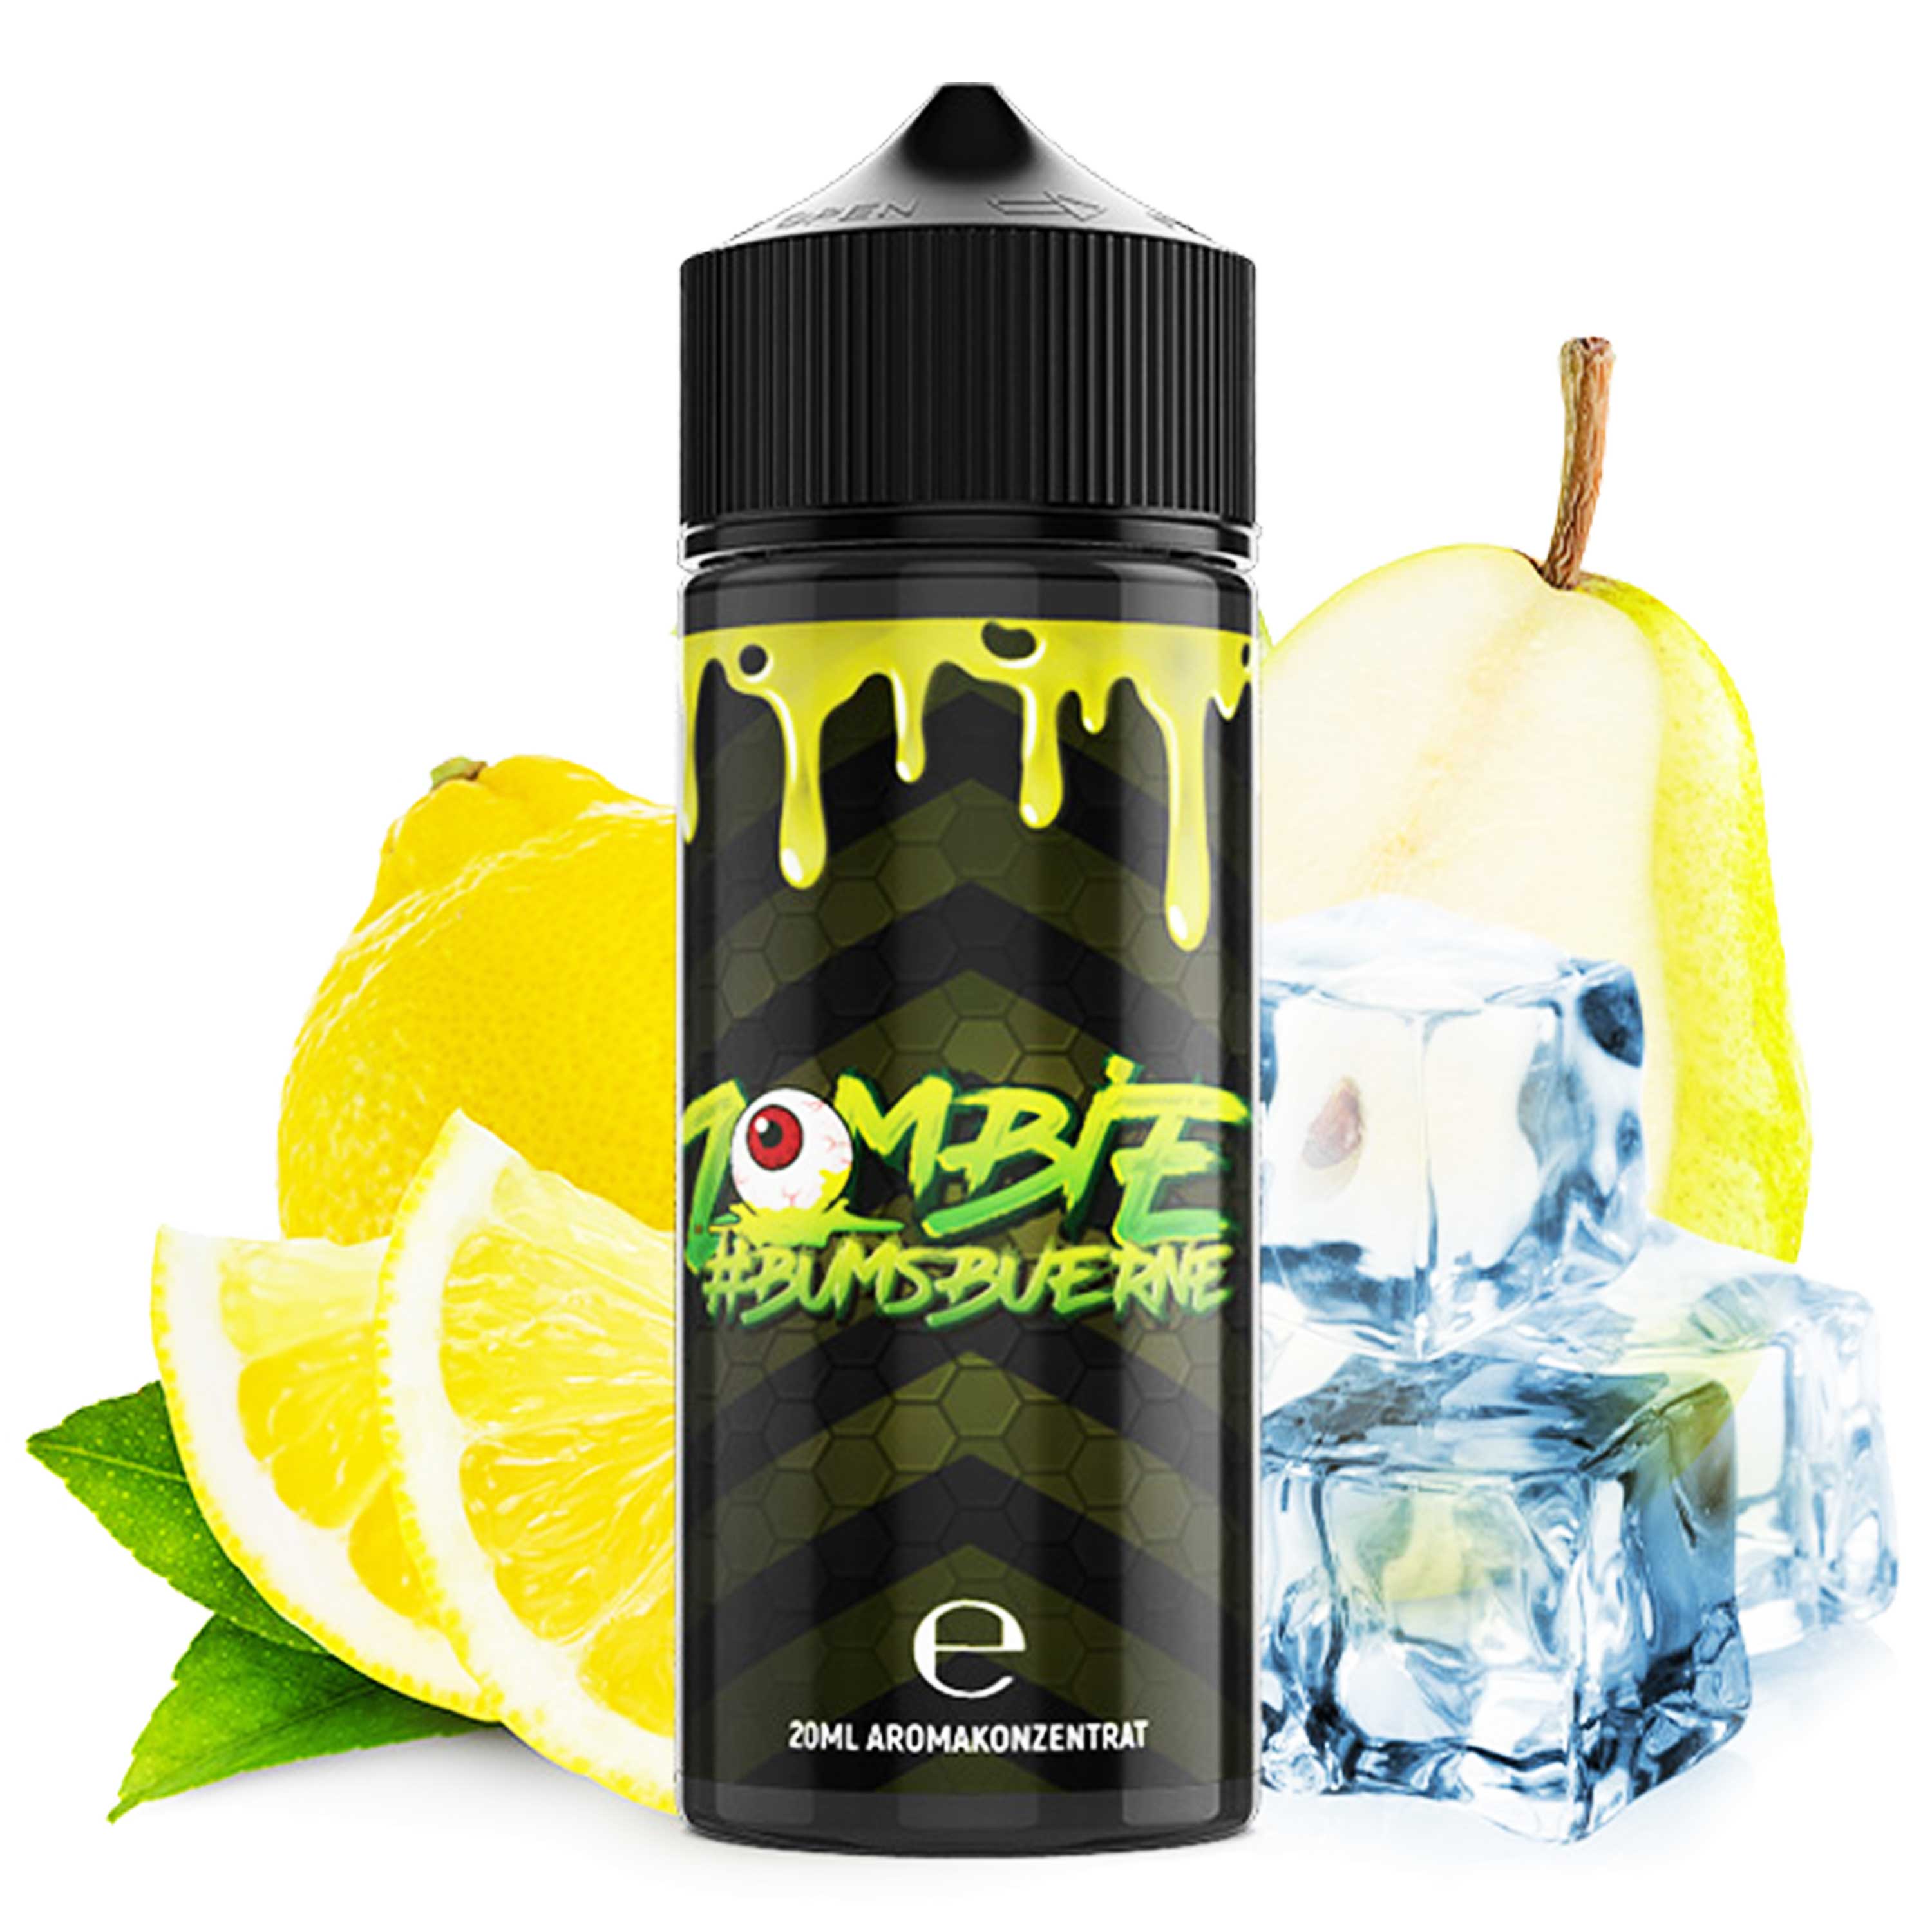 Zombie - #Bumsbuerne (20 ml in 120 ml LF) - Longfill-Aroma